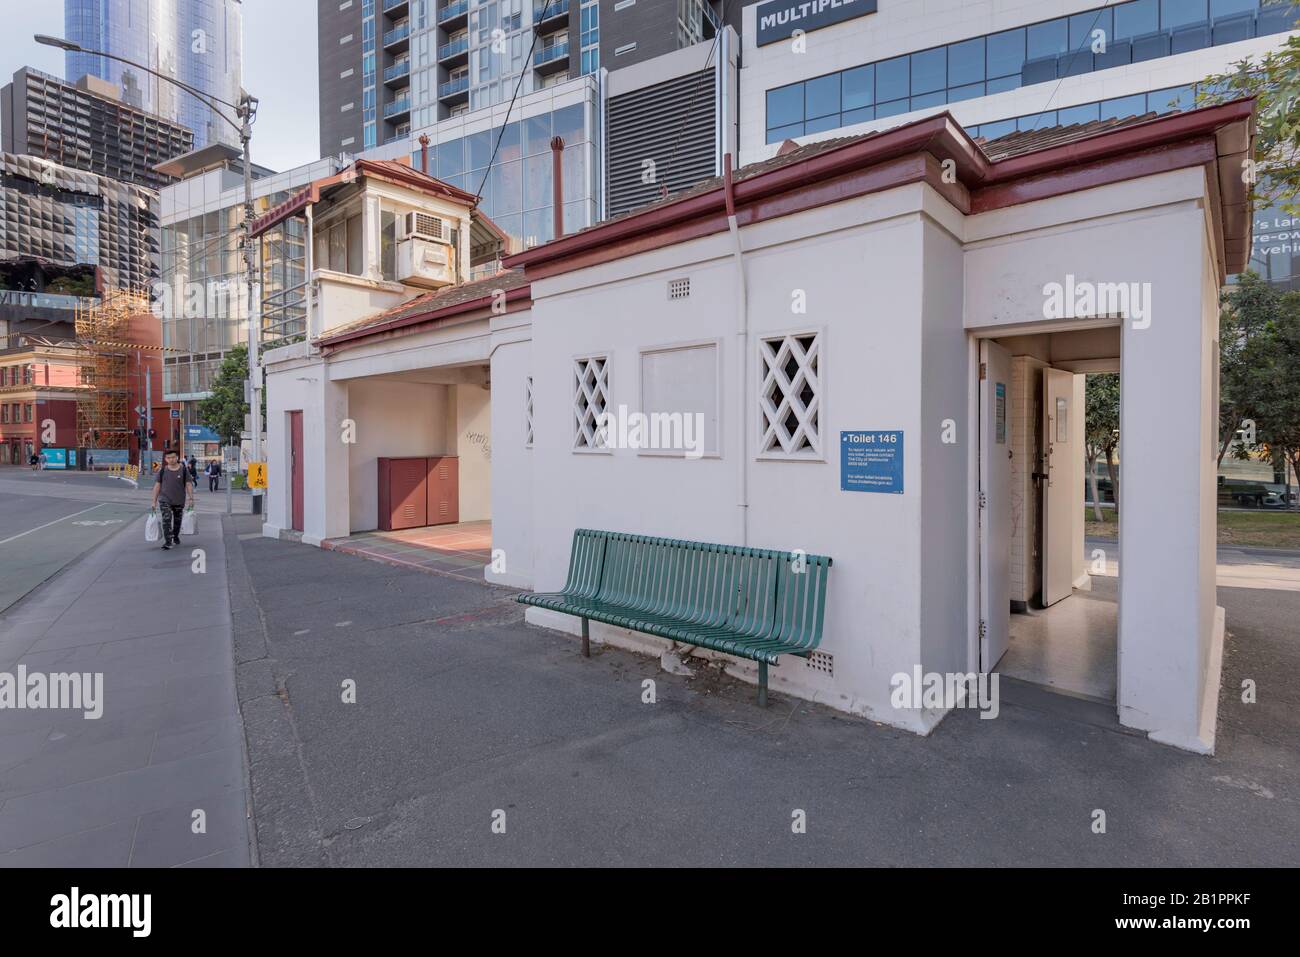 The Tramway Signal Cabin 146, Waiting Shelter and toilets were built in 1928 in Swanston Street by the Melbourne and Metropolitan Tramways Board. Stock Photo